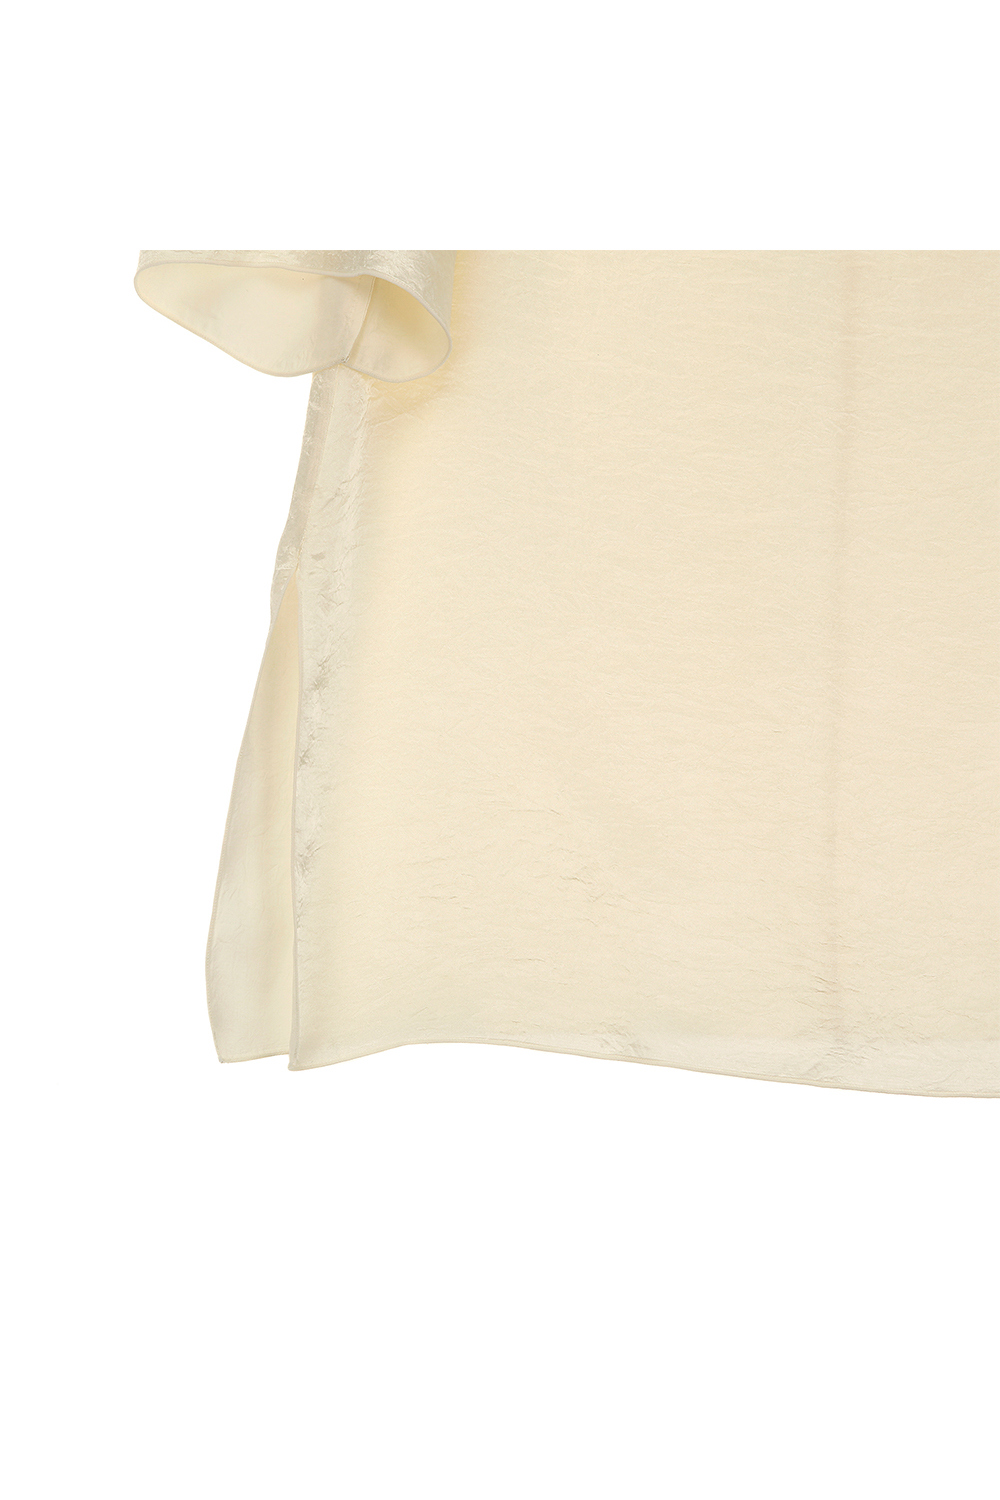 short sleeved tee cream color image-S1L13